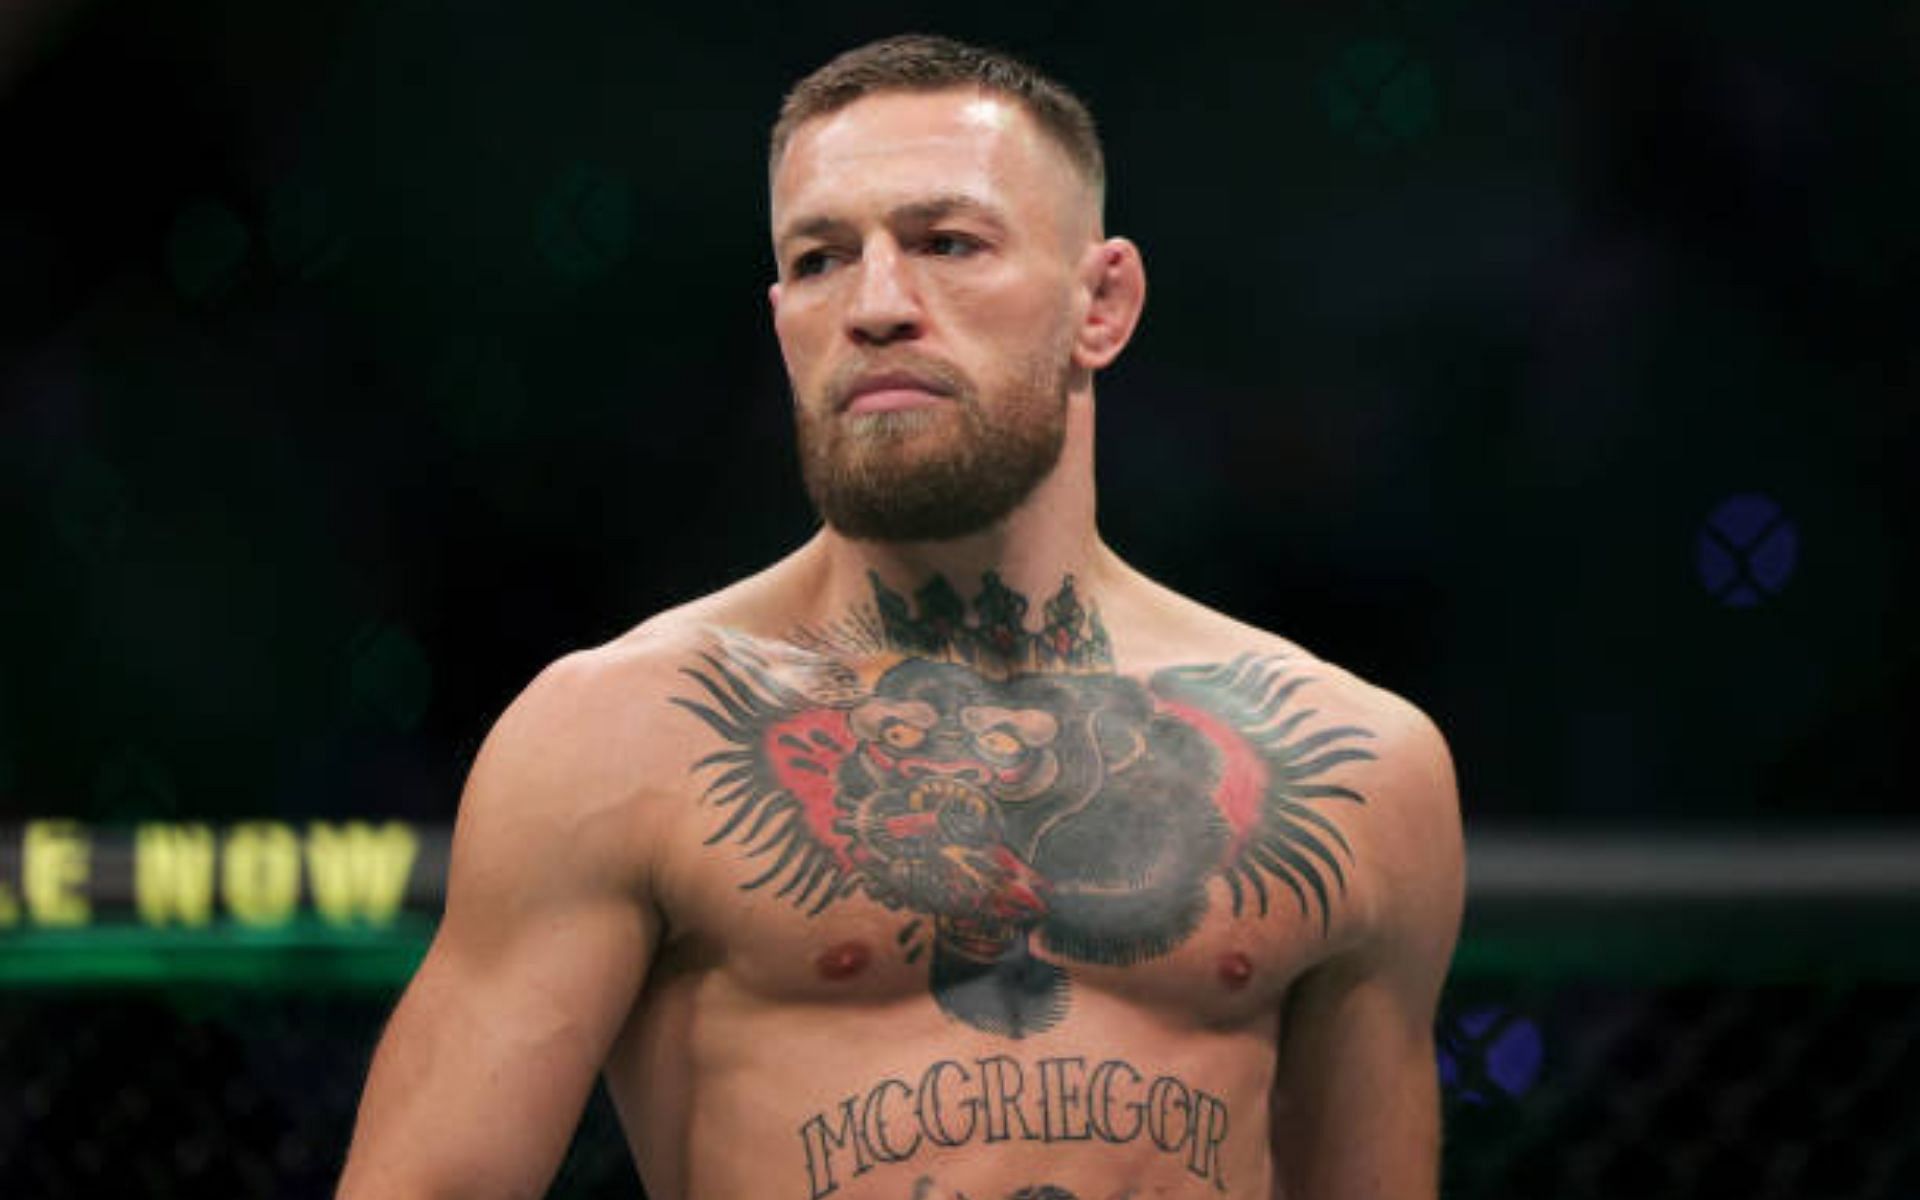 Former UFC two-division champion Conor McGregor (pictured) could be returning out of &quot;pettiness&quot;, says lightweight contender [Image Courtesy: @GettyImages]